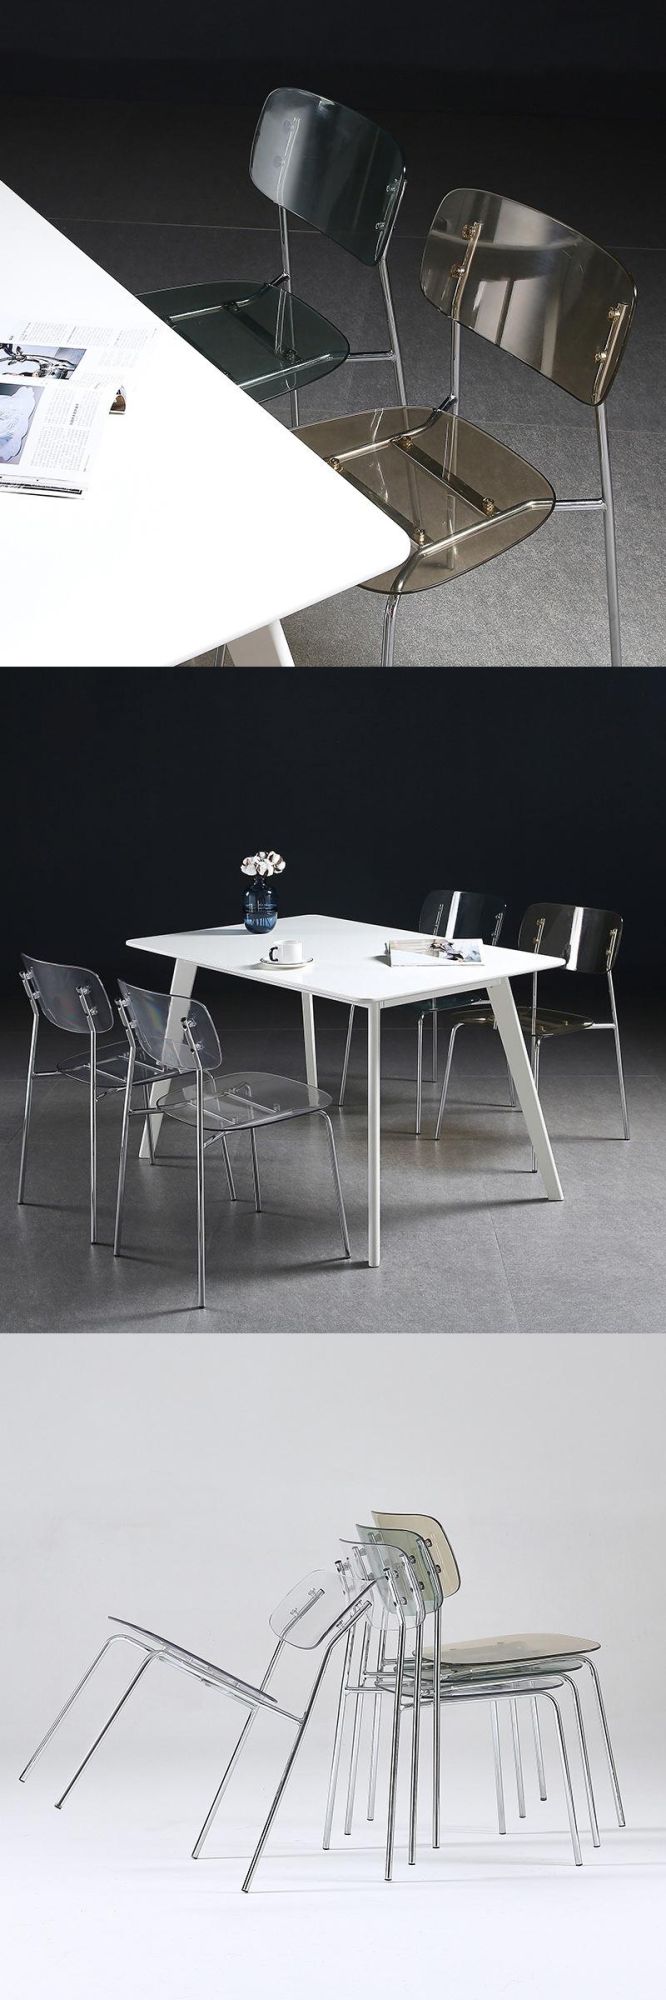 Home Cafe Dining Room Furniture Transparent Chair Plastic Crystal Chair Acrylic Dining Chair with Chromed Legs for Wedding